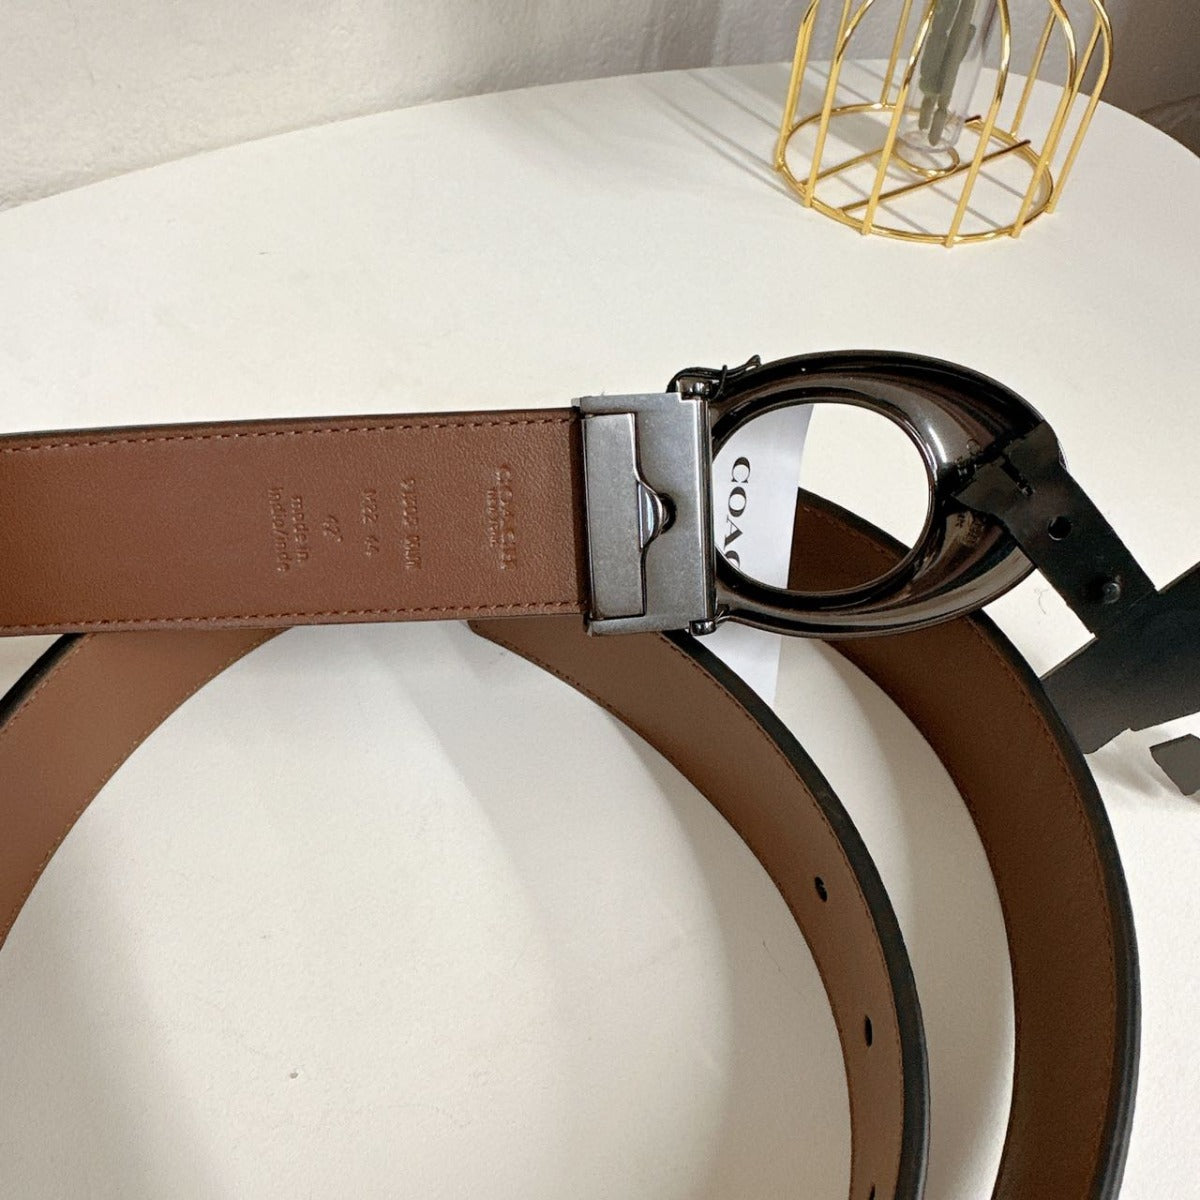 Coach 91305 Signature Buckle Cut To Size Reversible Belt, 38 Mm IN Dark brown iron ash head